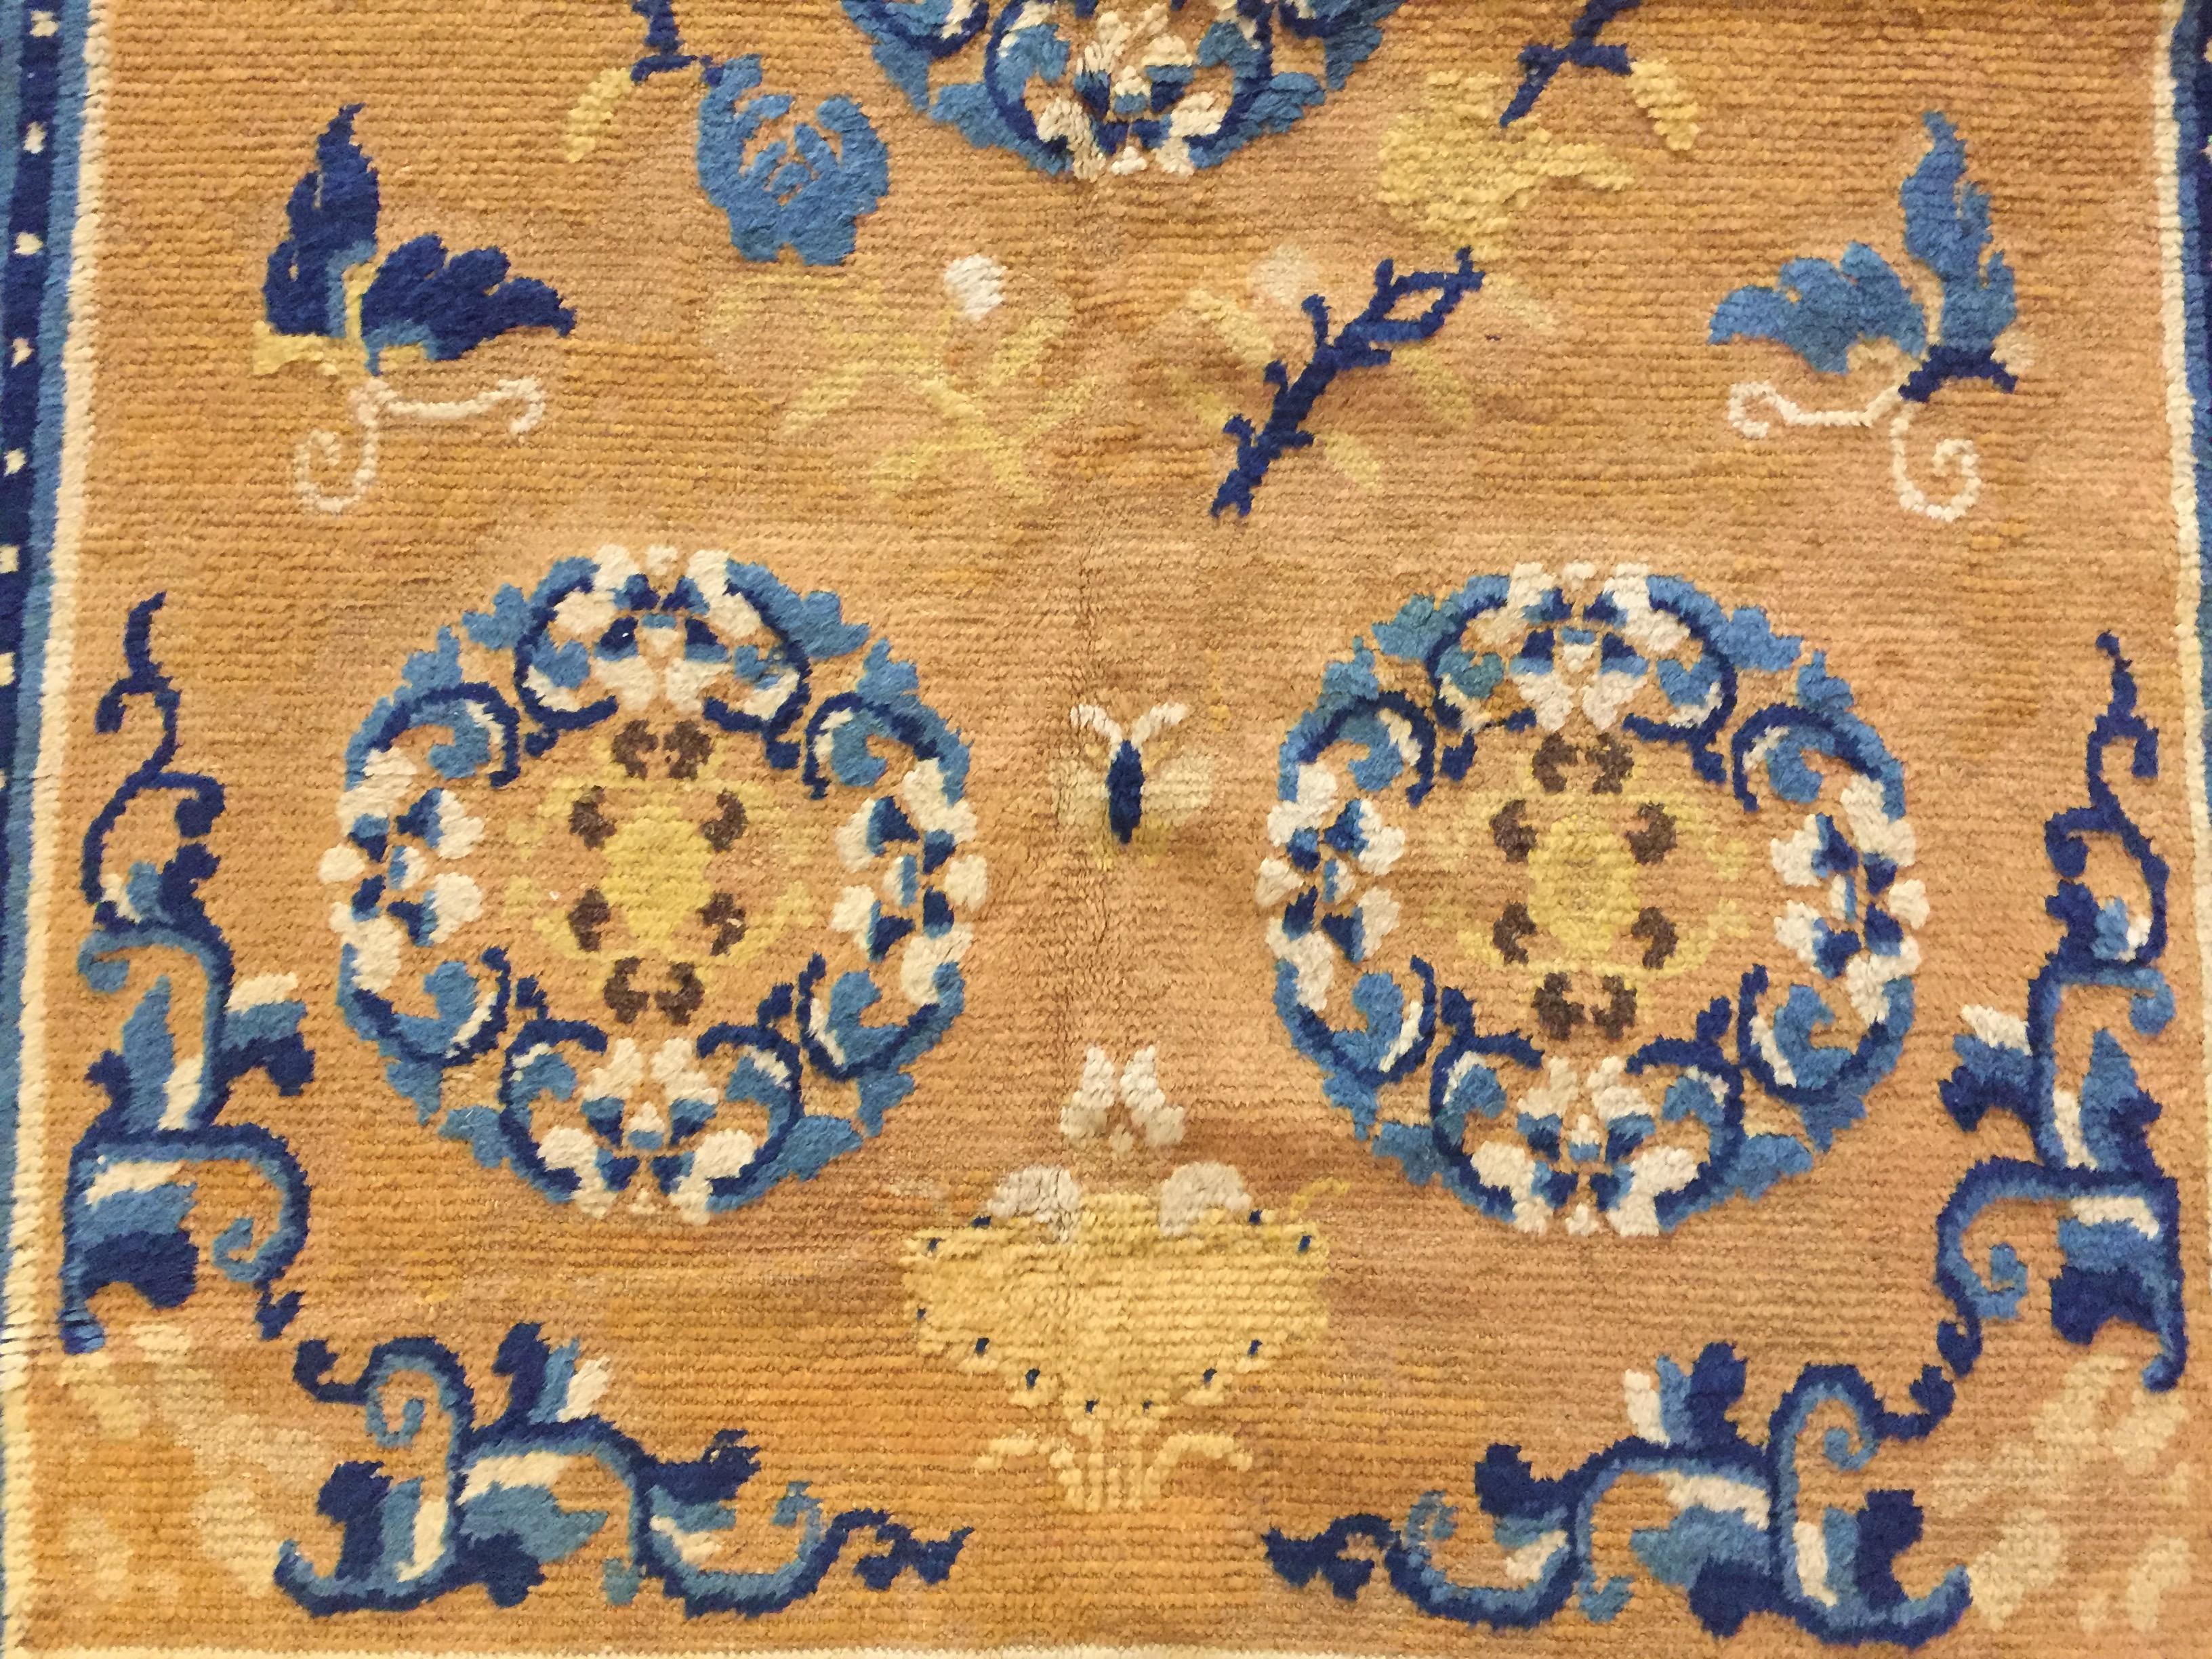 19th Century Chinese Ninxia Ocher Yellow Rug Fine Hand Knotted, Cotton and Wool In Good Condition For Sale In Firenze, IT